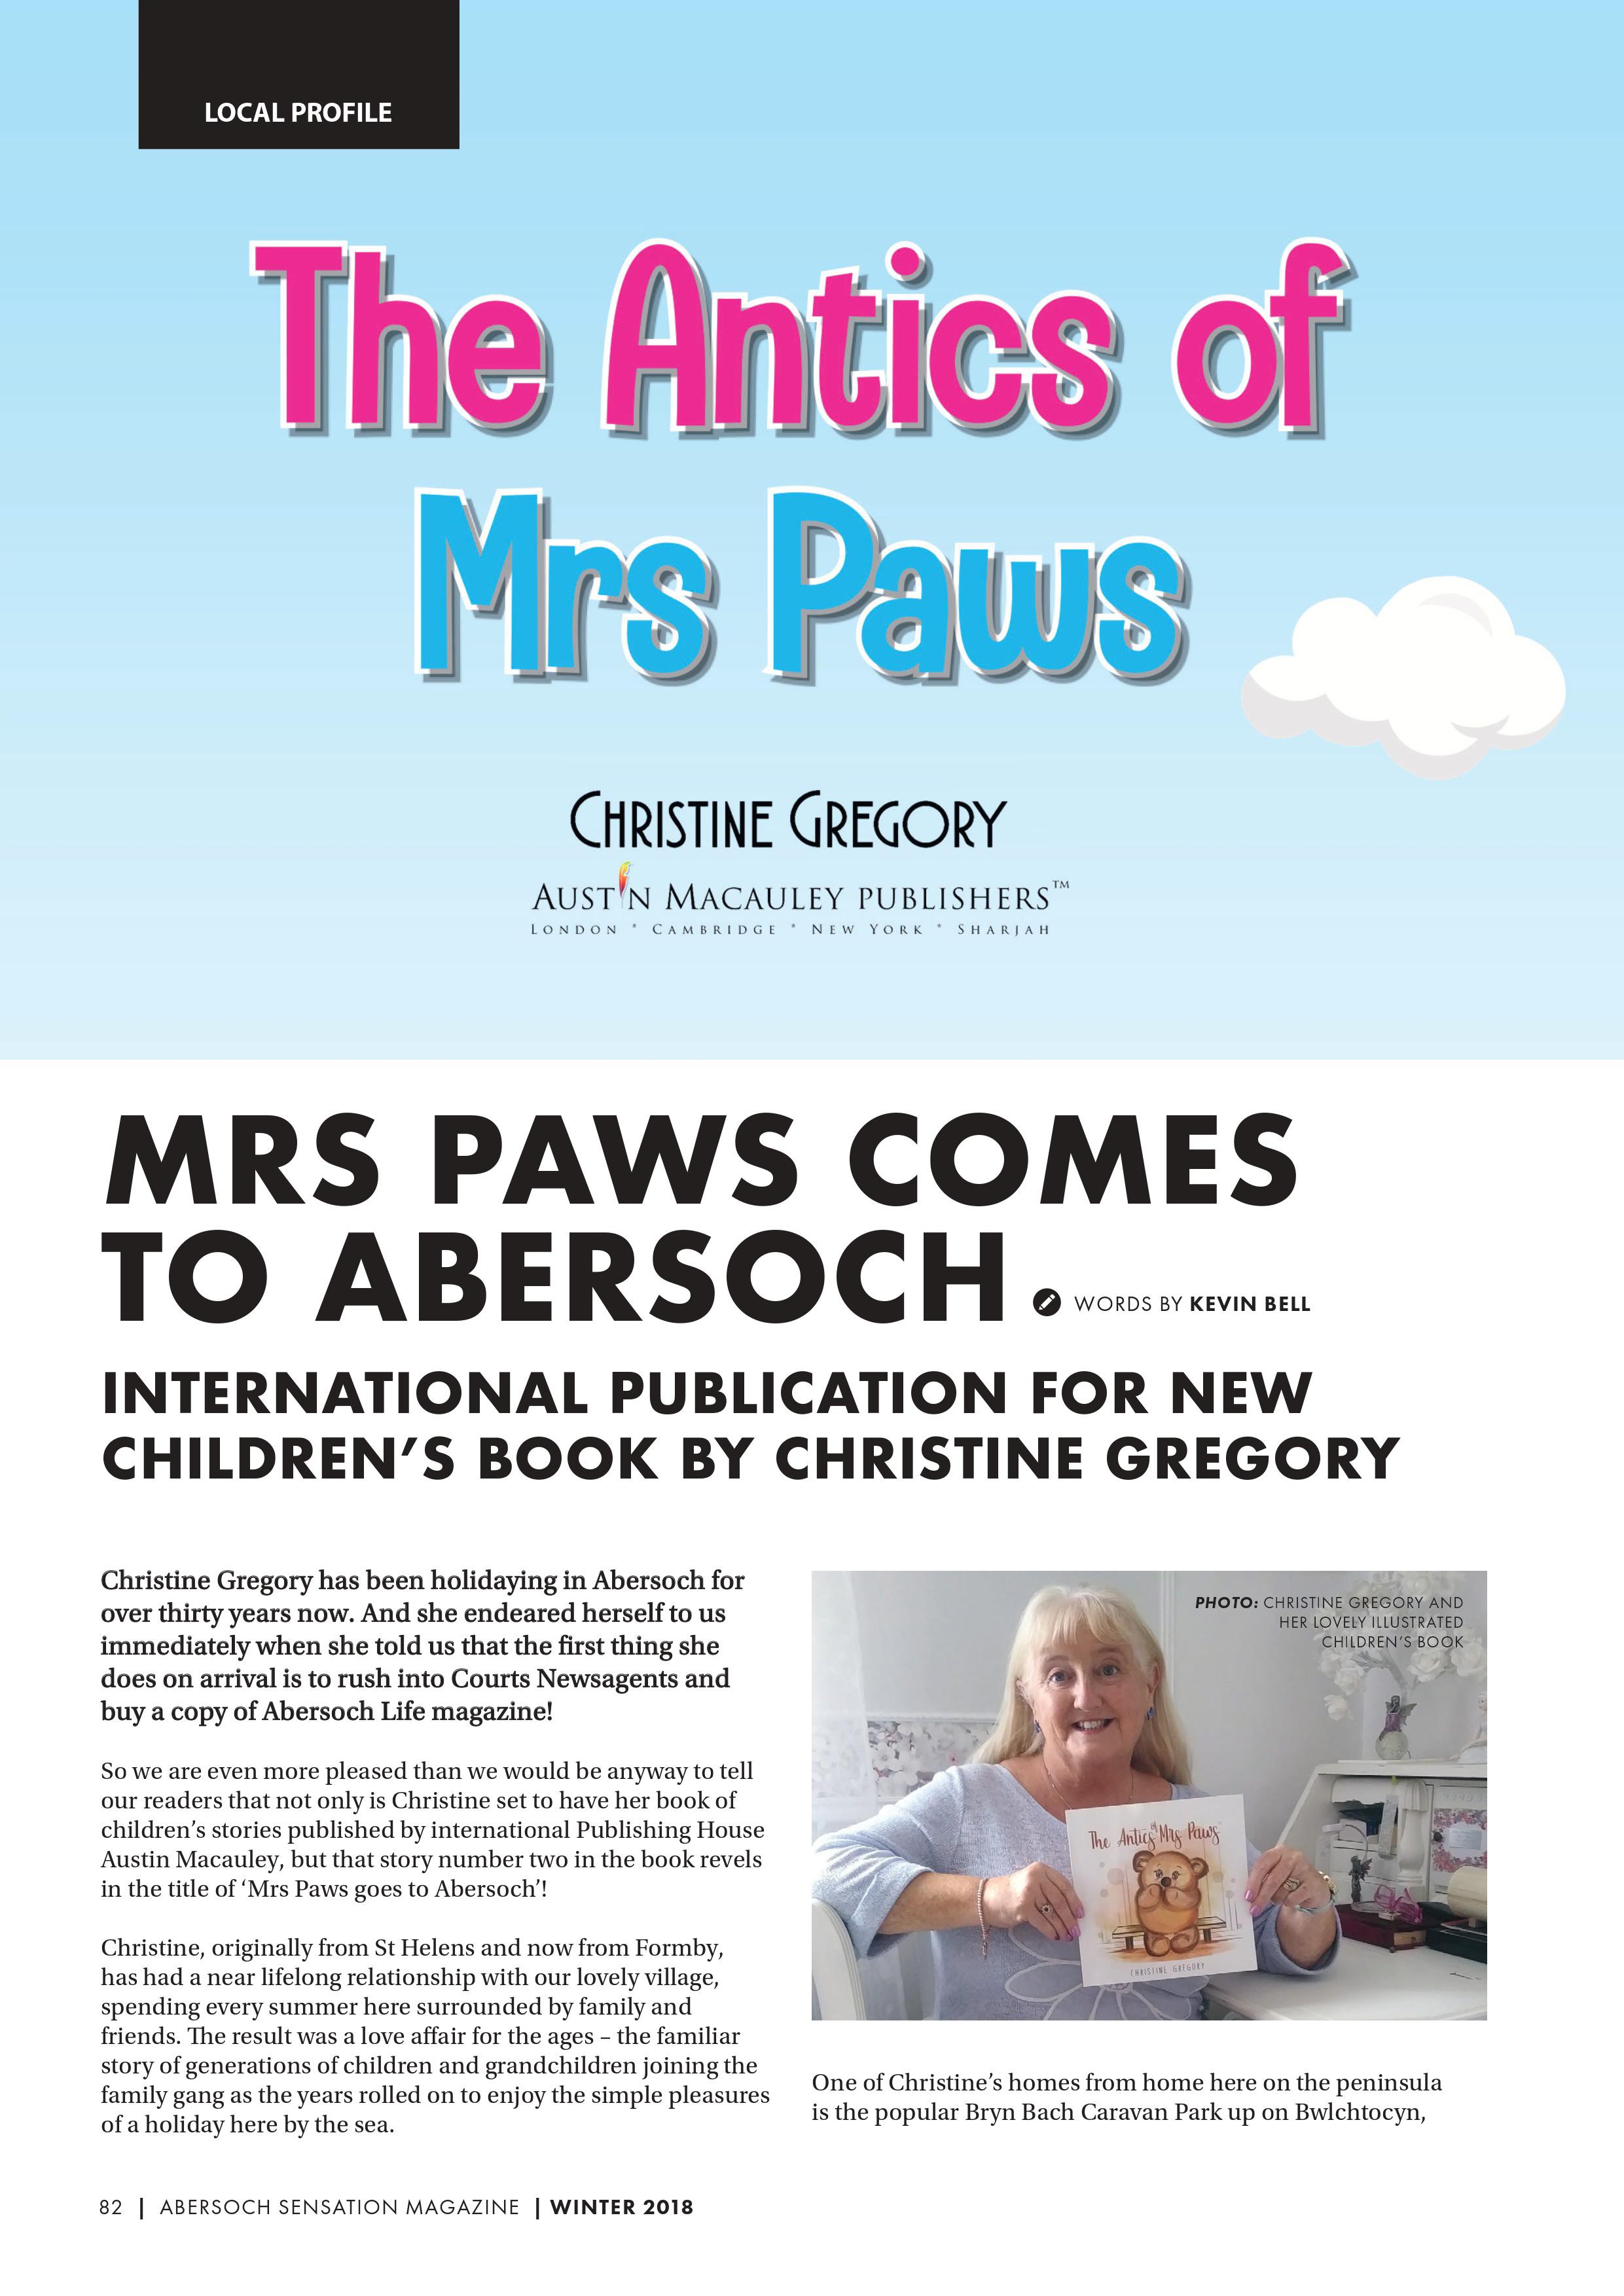 Children Book Author Christine Gregory’s Upcoming Book Featured in Abersoch Life Magazine